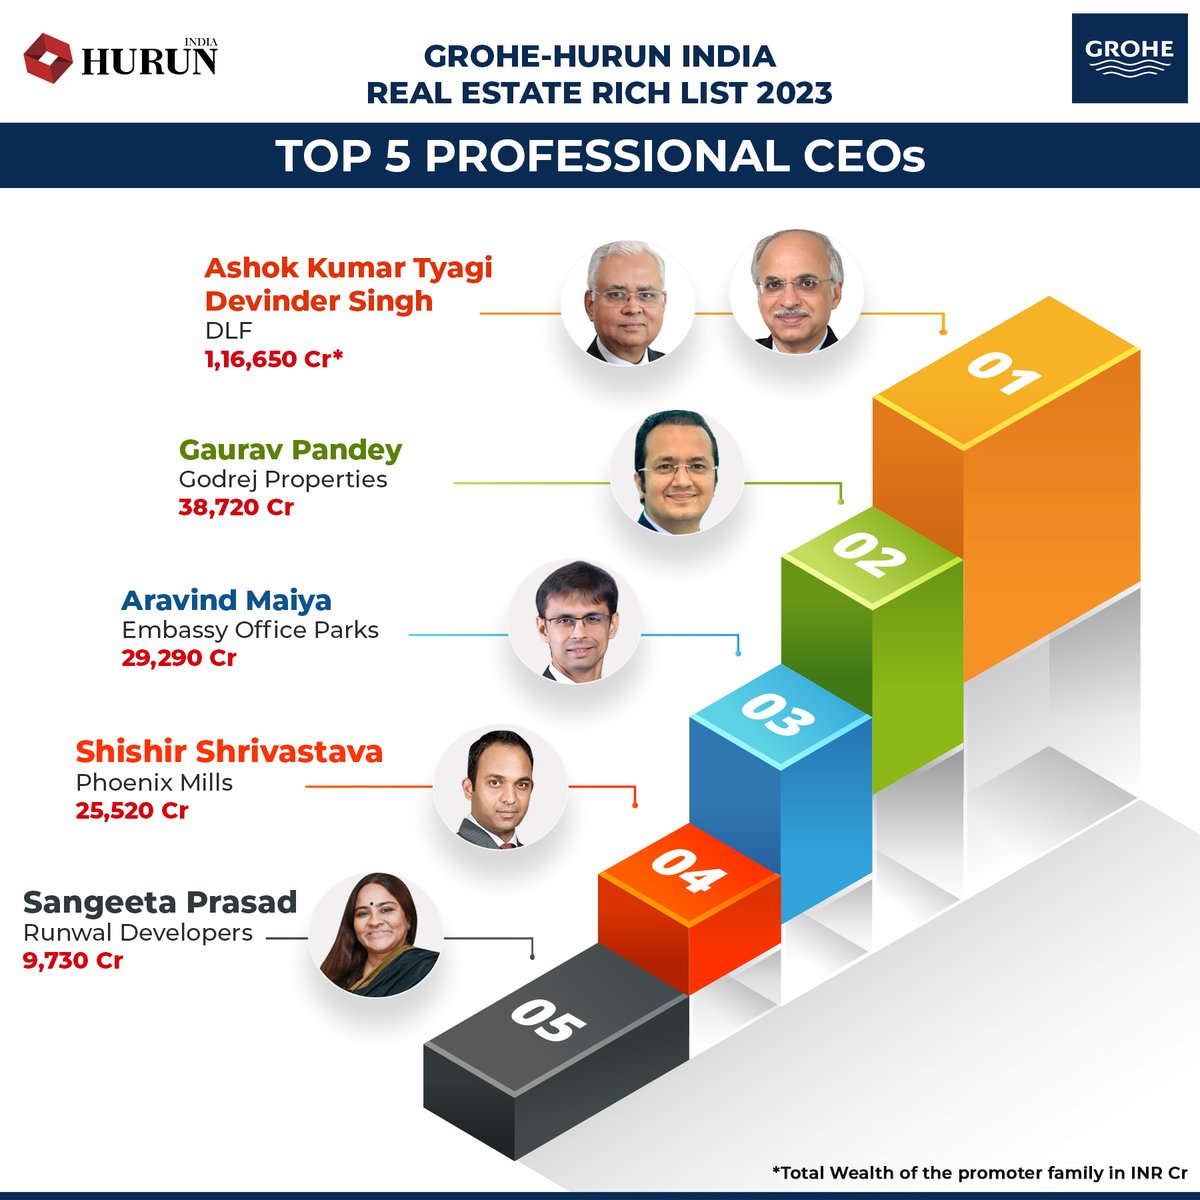 Top 5 professional CEOs in the Grohe Hurun India Real Estate Rich List 2023.

@AnasRahman @GROHEIN 
#hurunreport #hurunreportindia #realestate #india